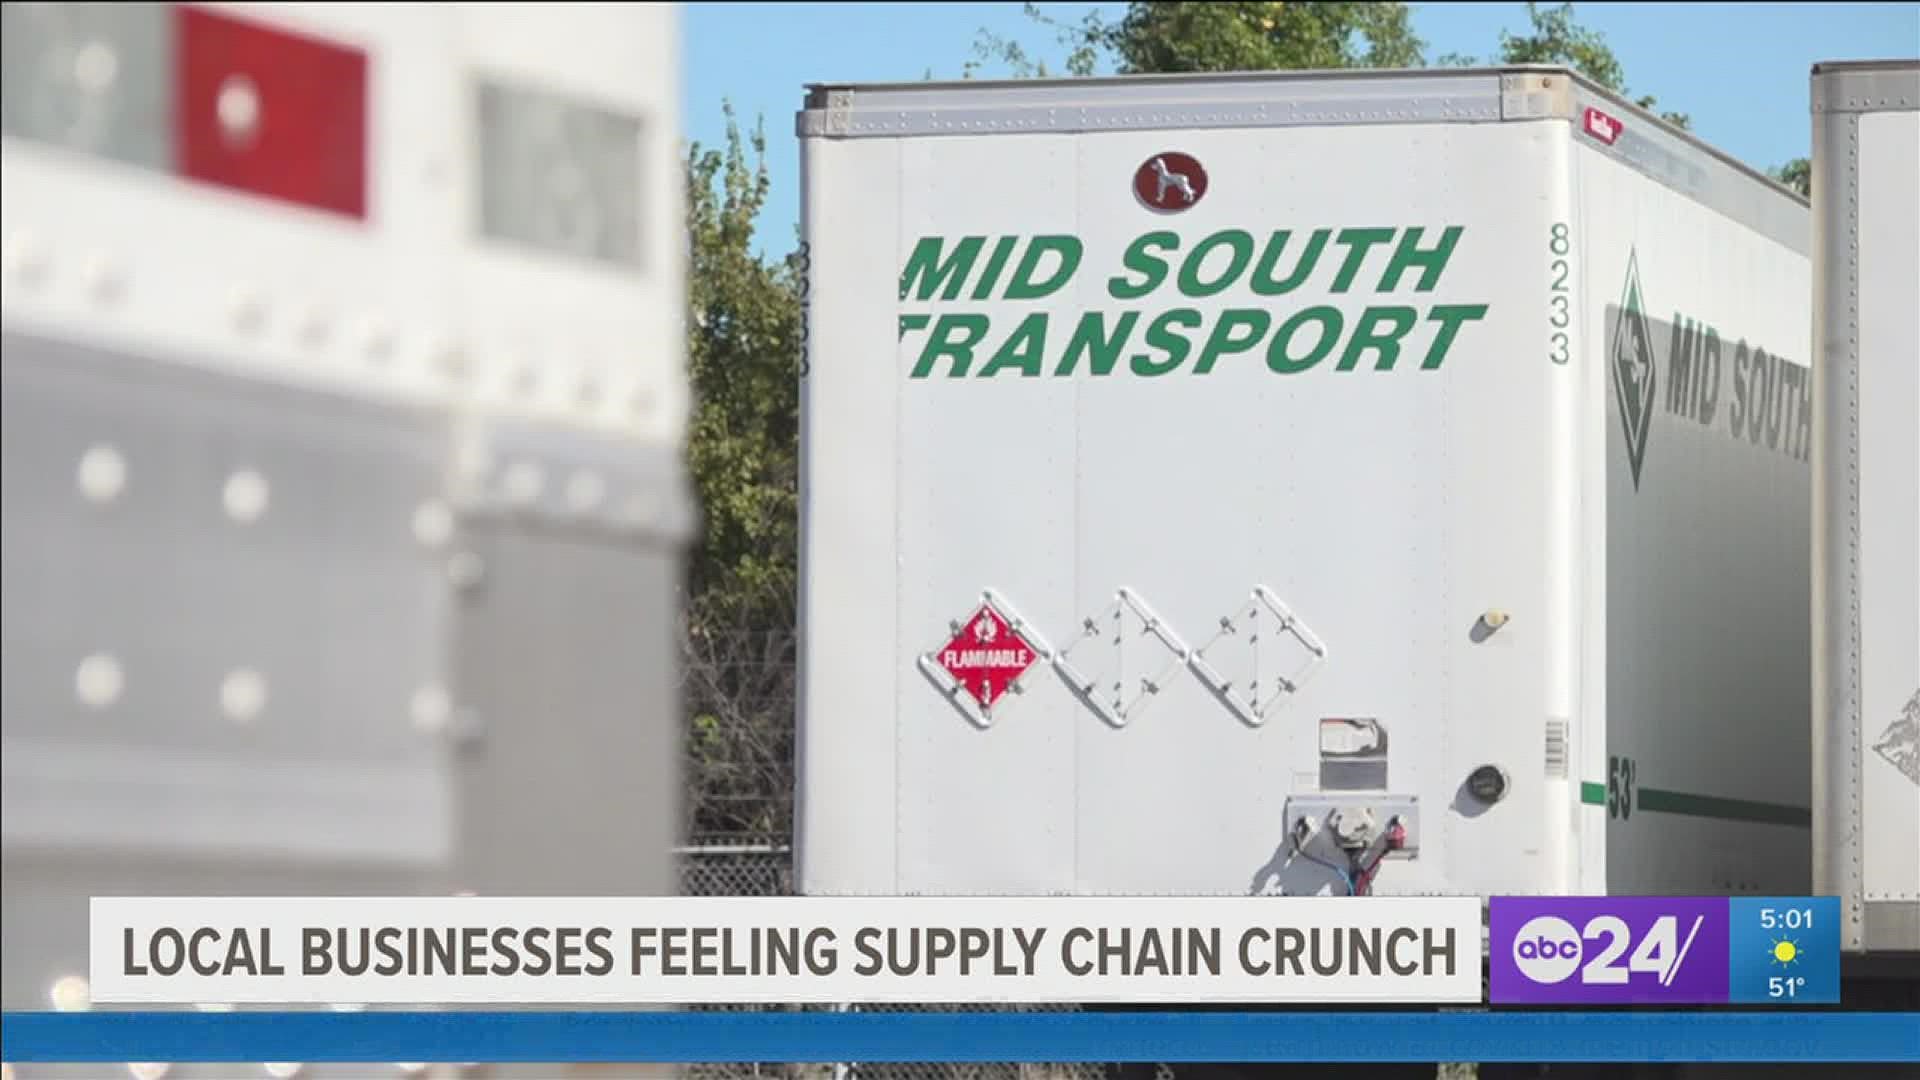 Those at Mid South Transport, Inc. said shoppers should "get it early" as many factors impact how goods can get to the area from bottlenecked ports.